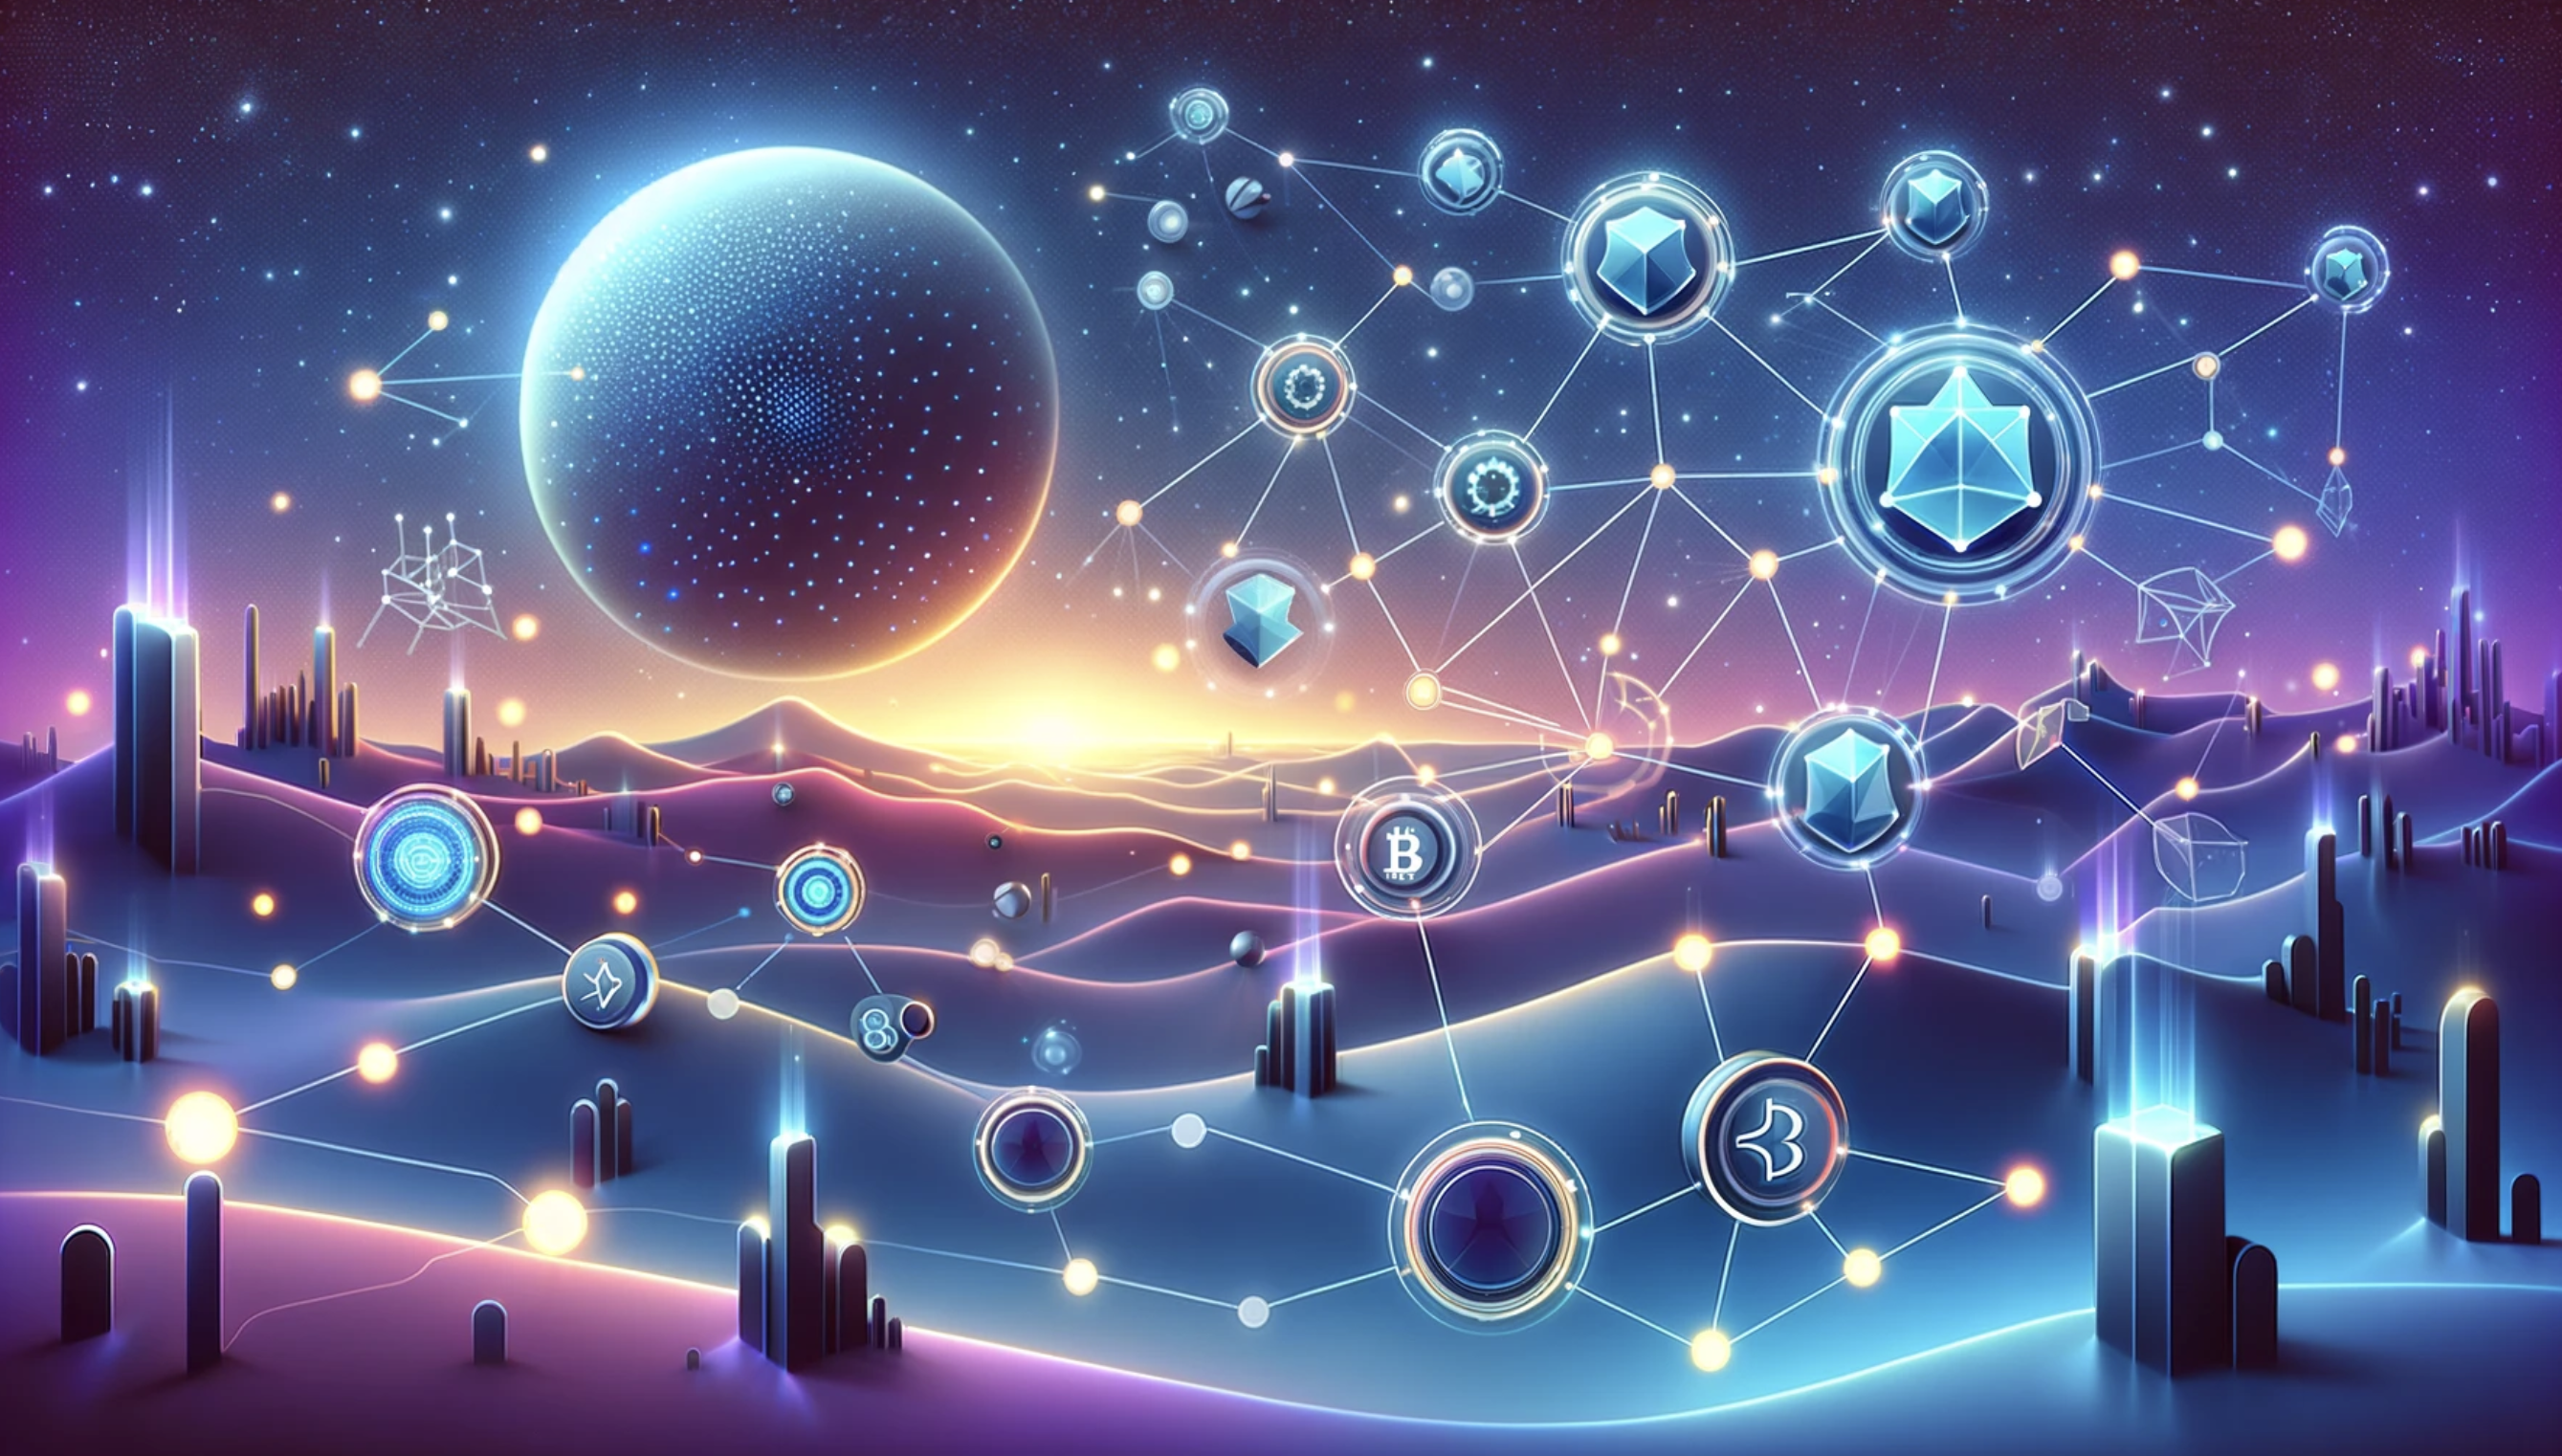 A globe in the background connected to other parts of the universe - depicting the Cosmos ecosystem